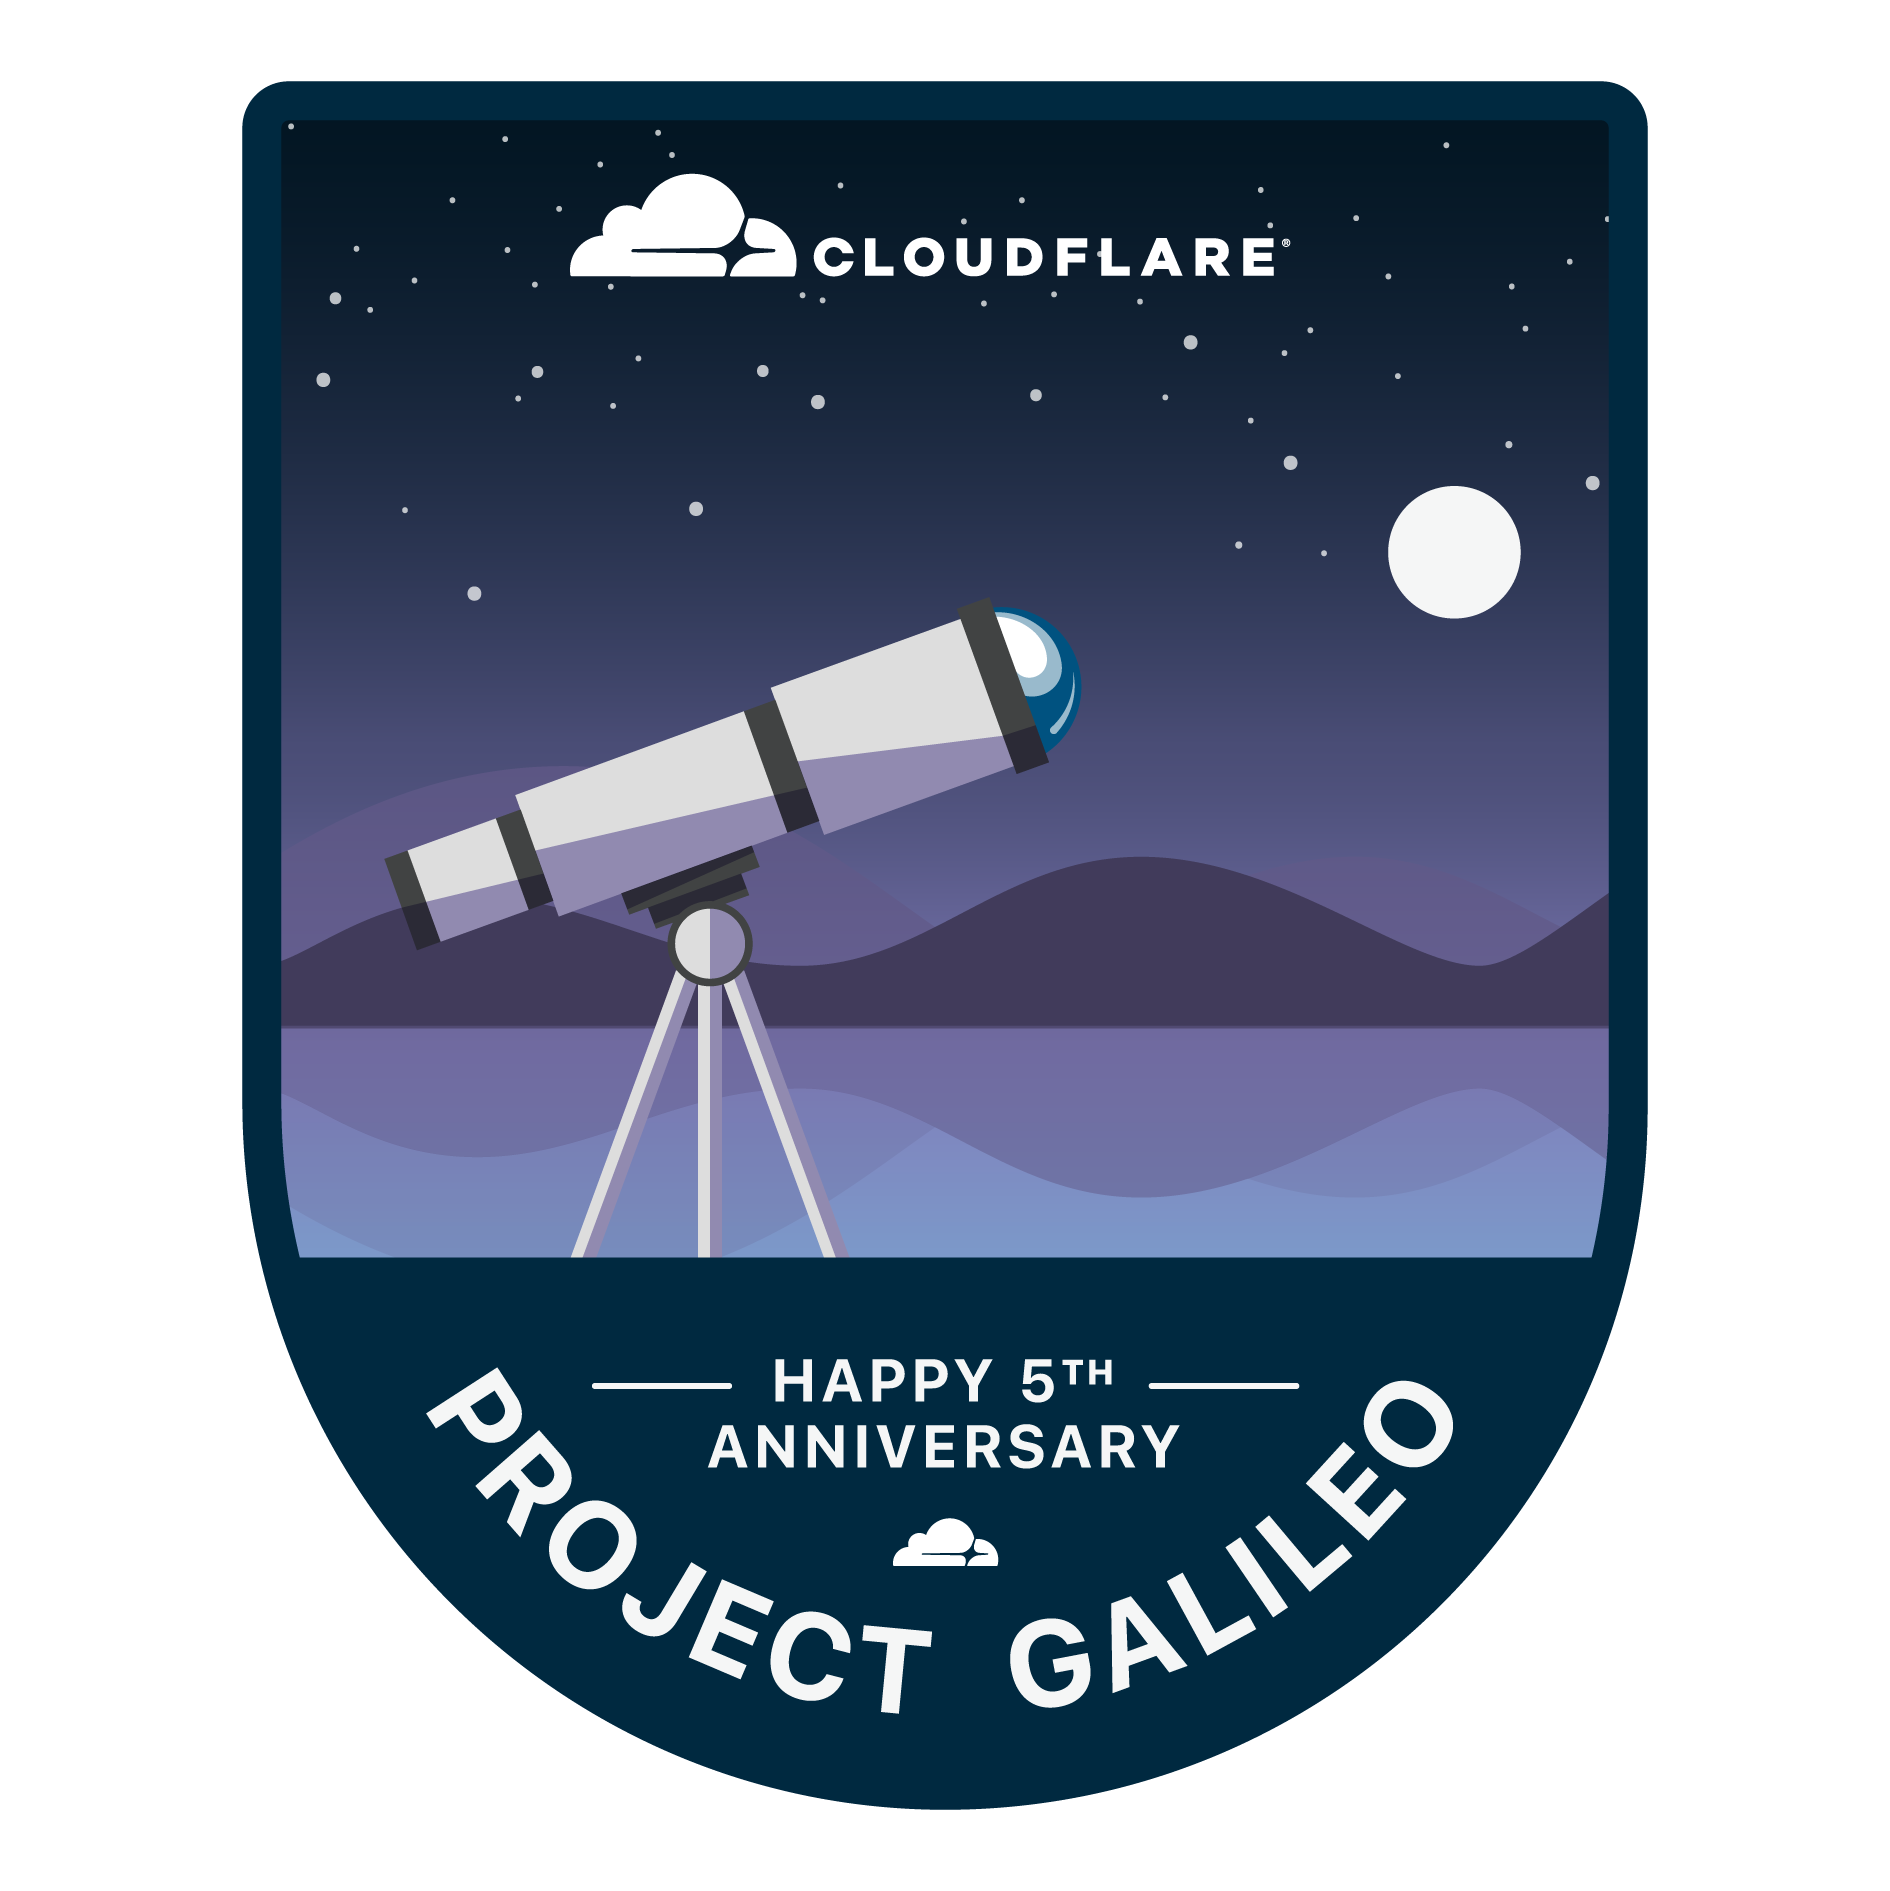 Project Galileo: Lessons from 5 years of protecting the most vulnerable online